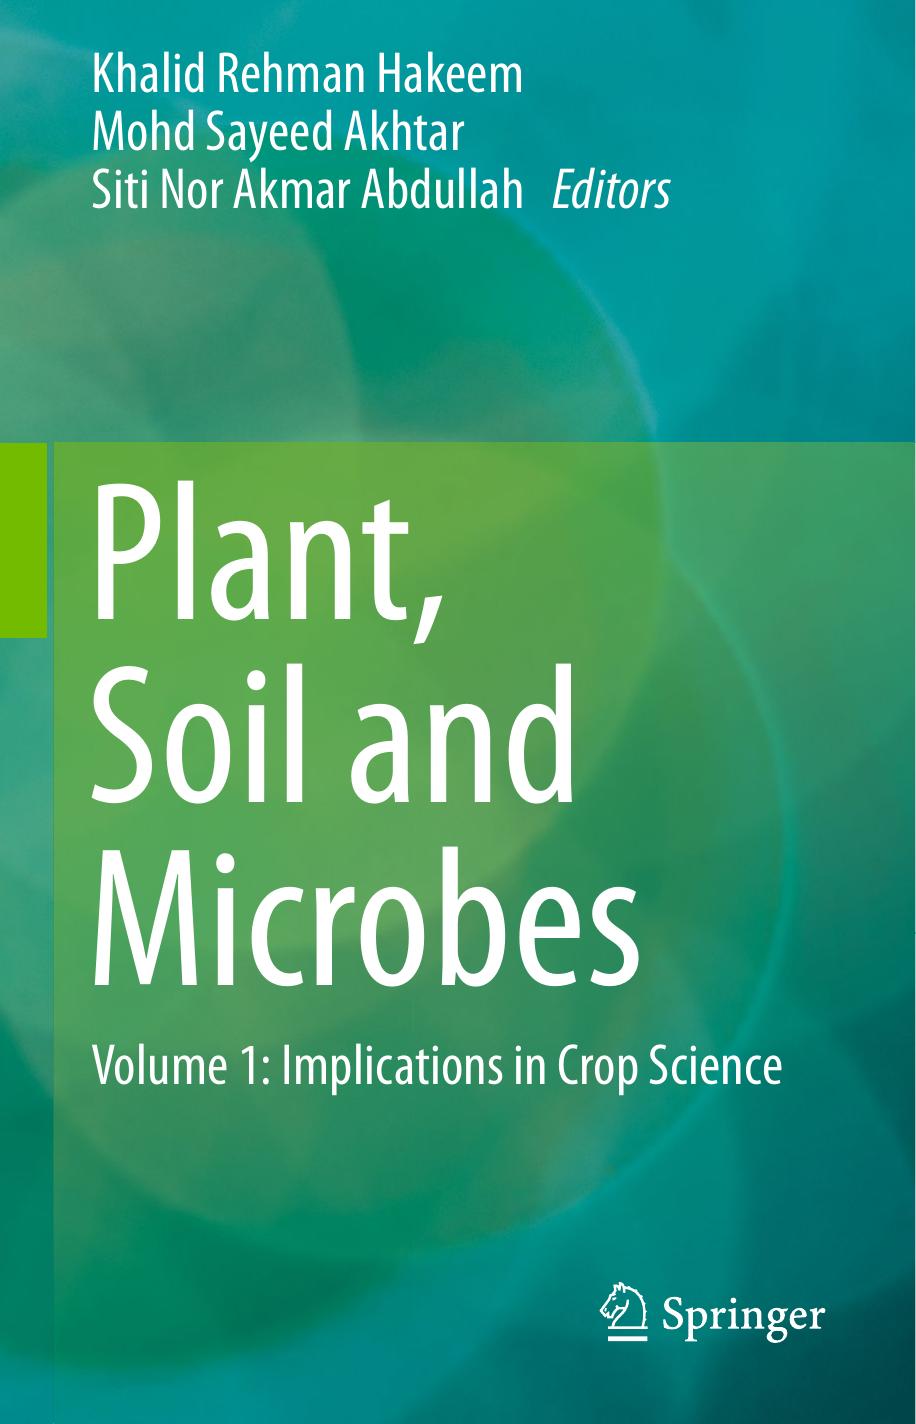 Plant, Soil and Microbes  Volume 1  Implications in Crop Science ( PDFDrive ), 2016